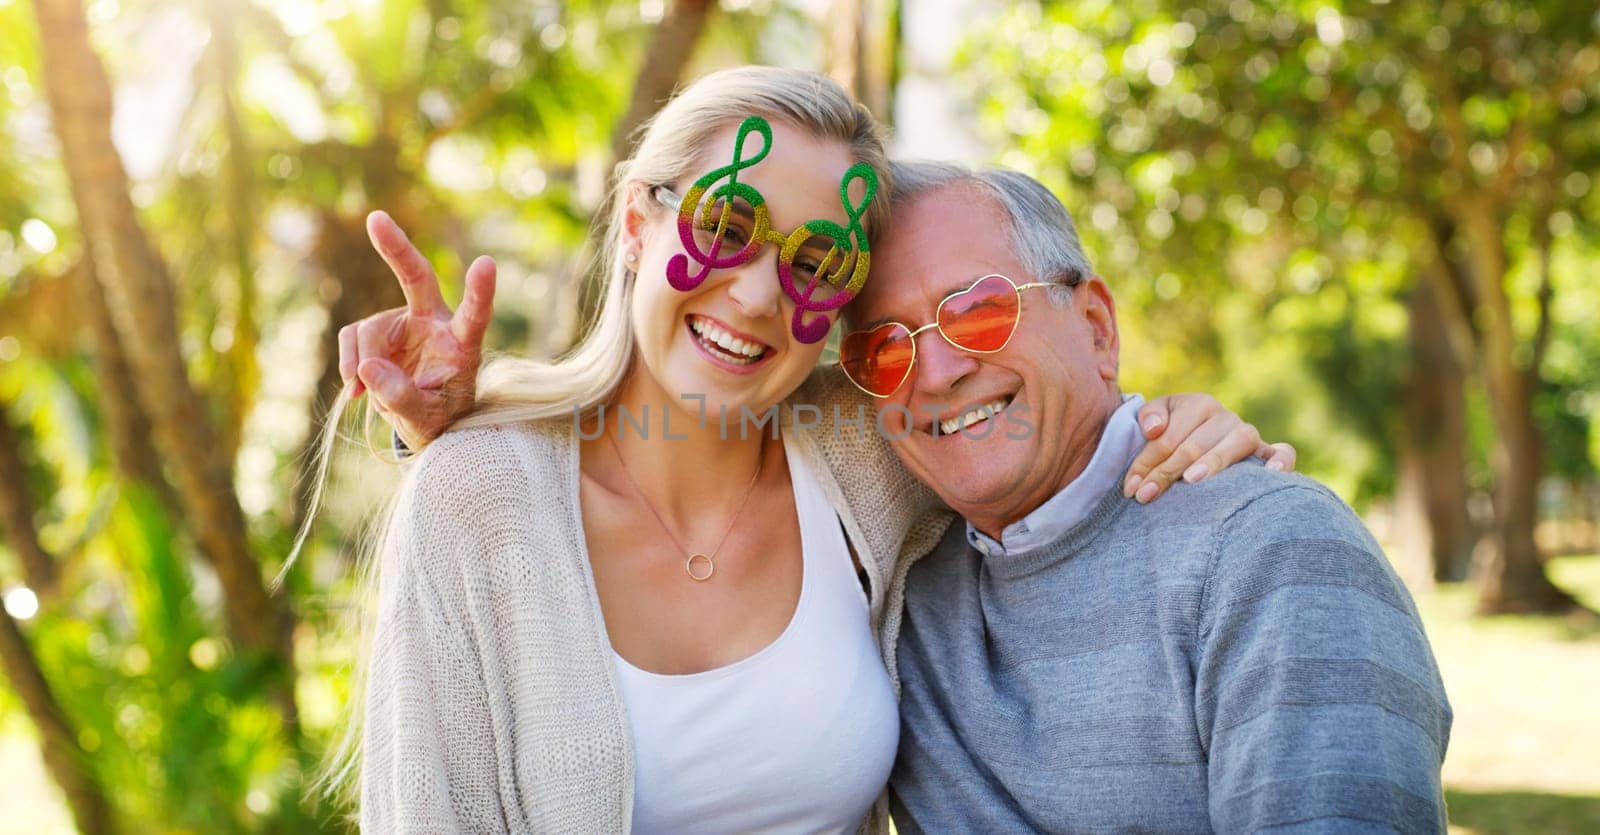 Park, portrait and senior father with daughter, woman or love for care, hug or support in England. Smile, cool sunglasses or elderly man with girl in retirement on holiday in outdoor garden or nature.